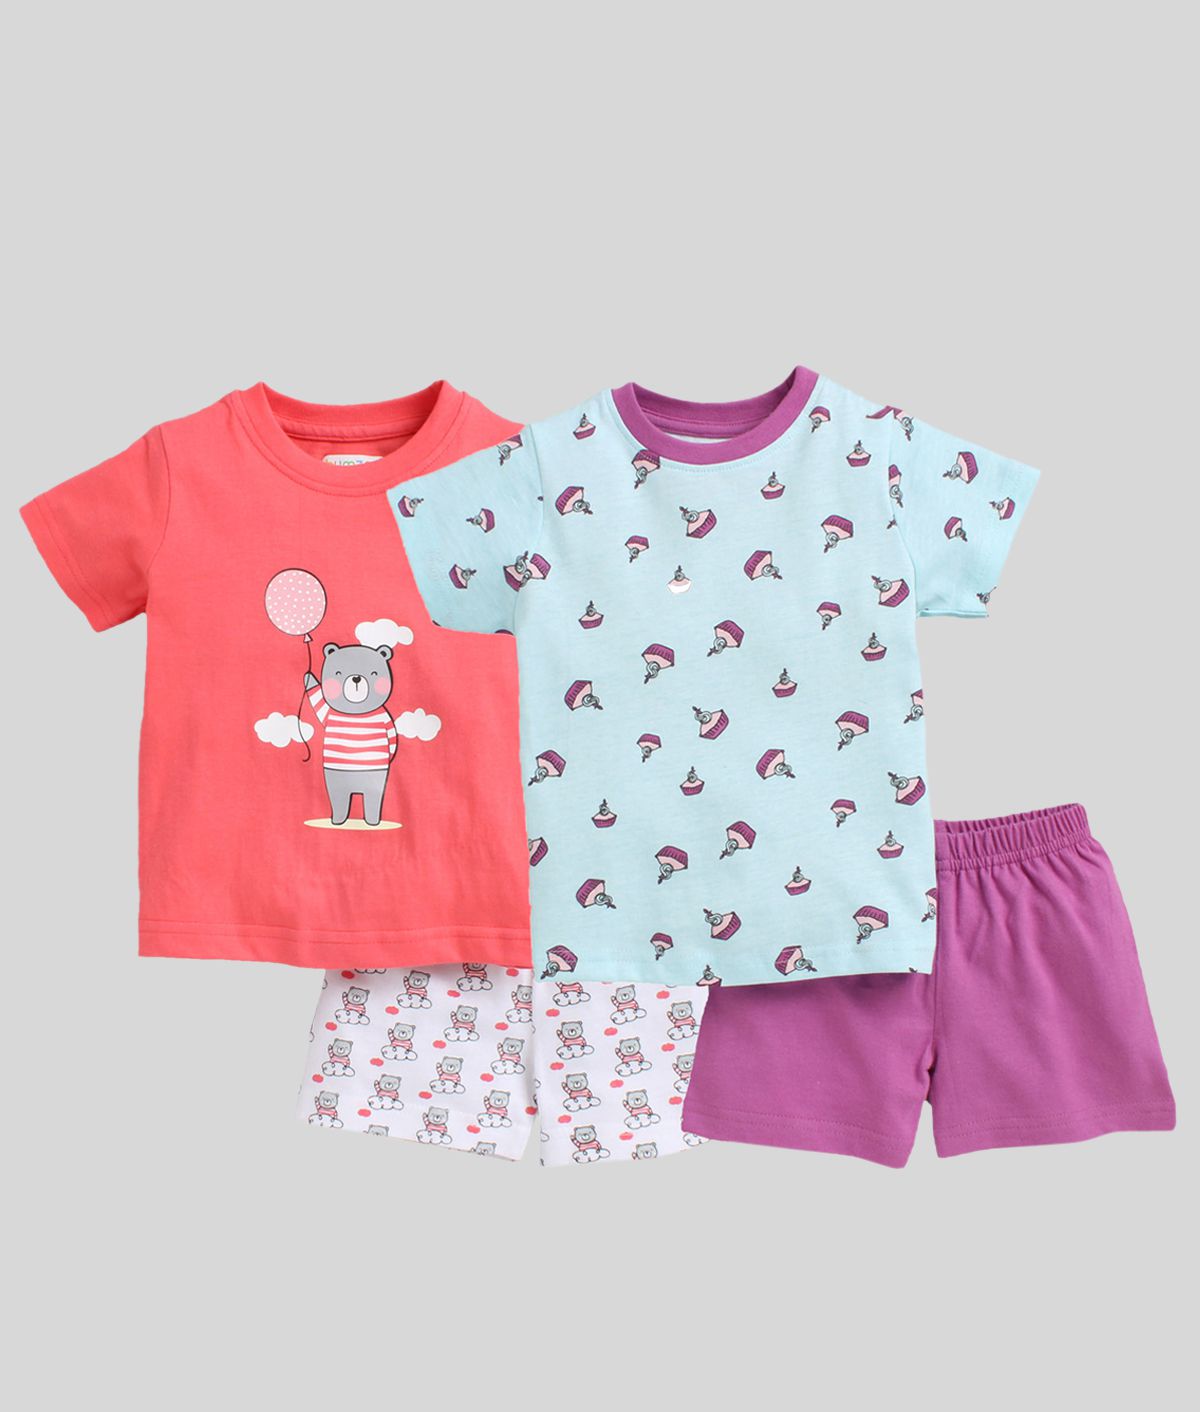     			BUMZEE Purple & Pink Baby Girls T-Shirt & Shorts Set Pack of 2 Age - 3-6 Months